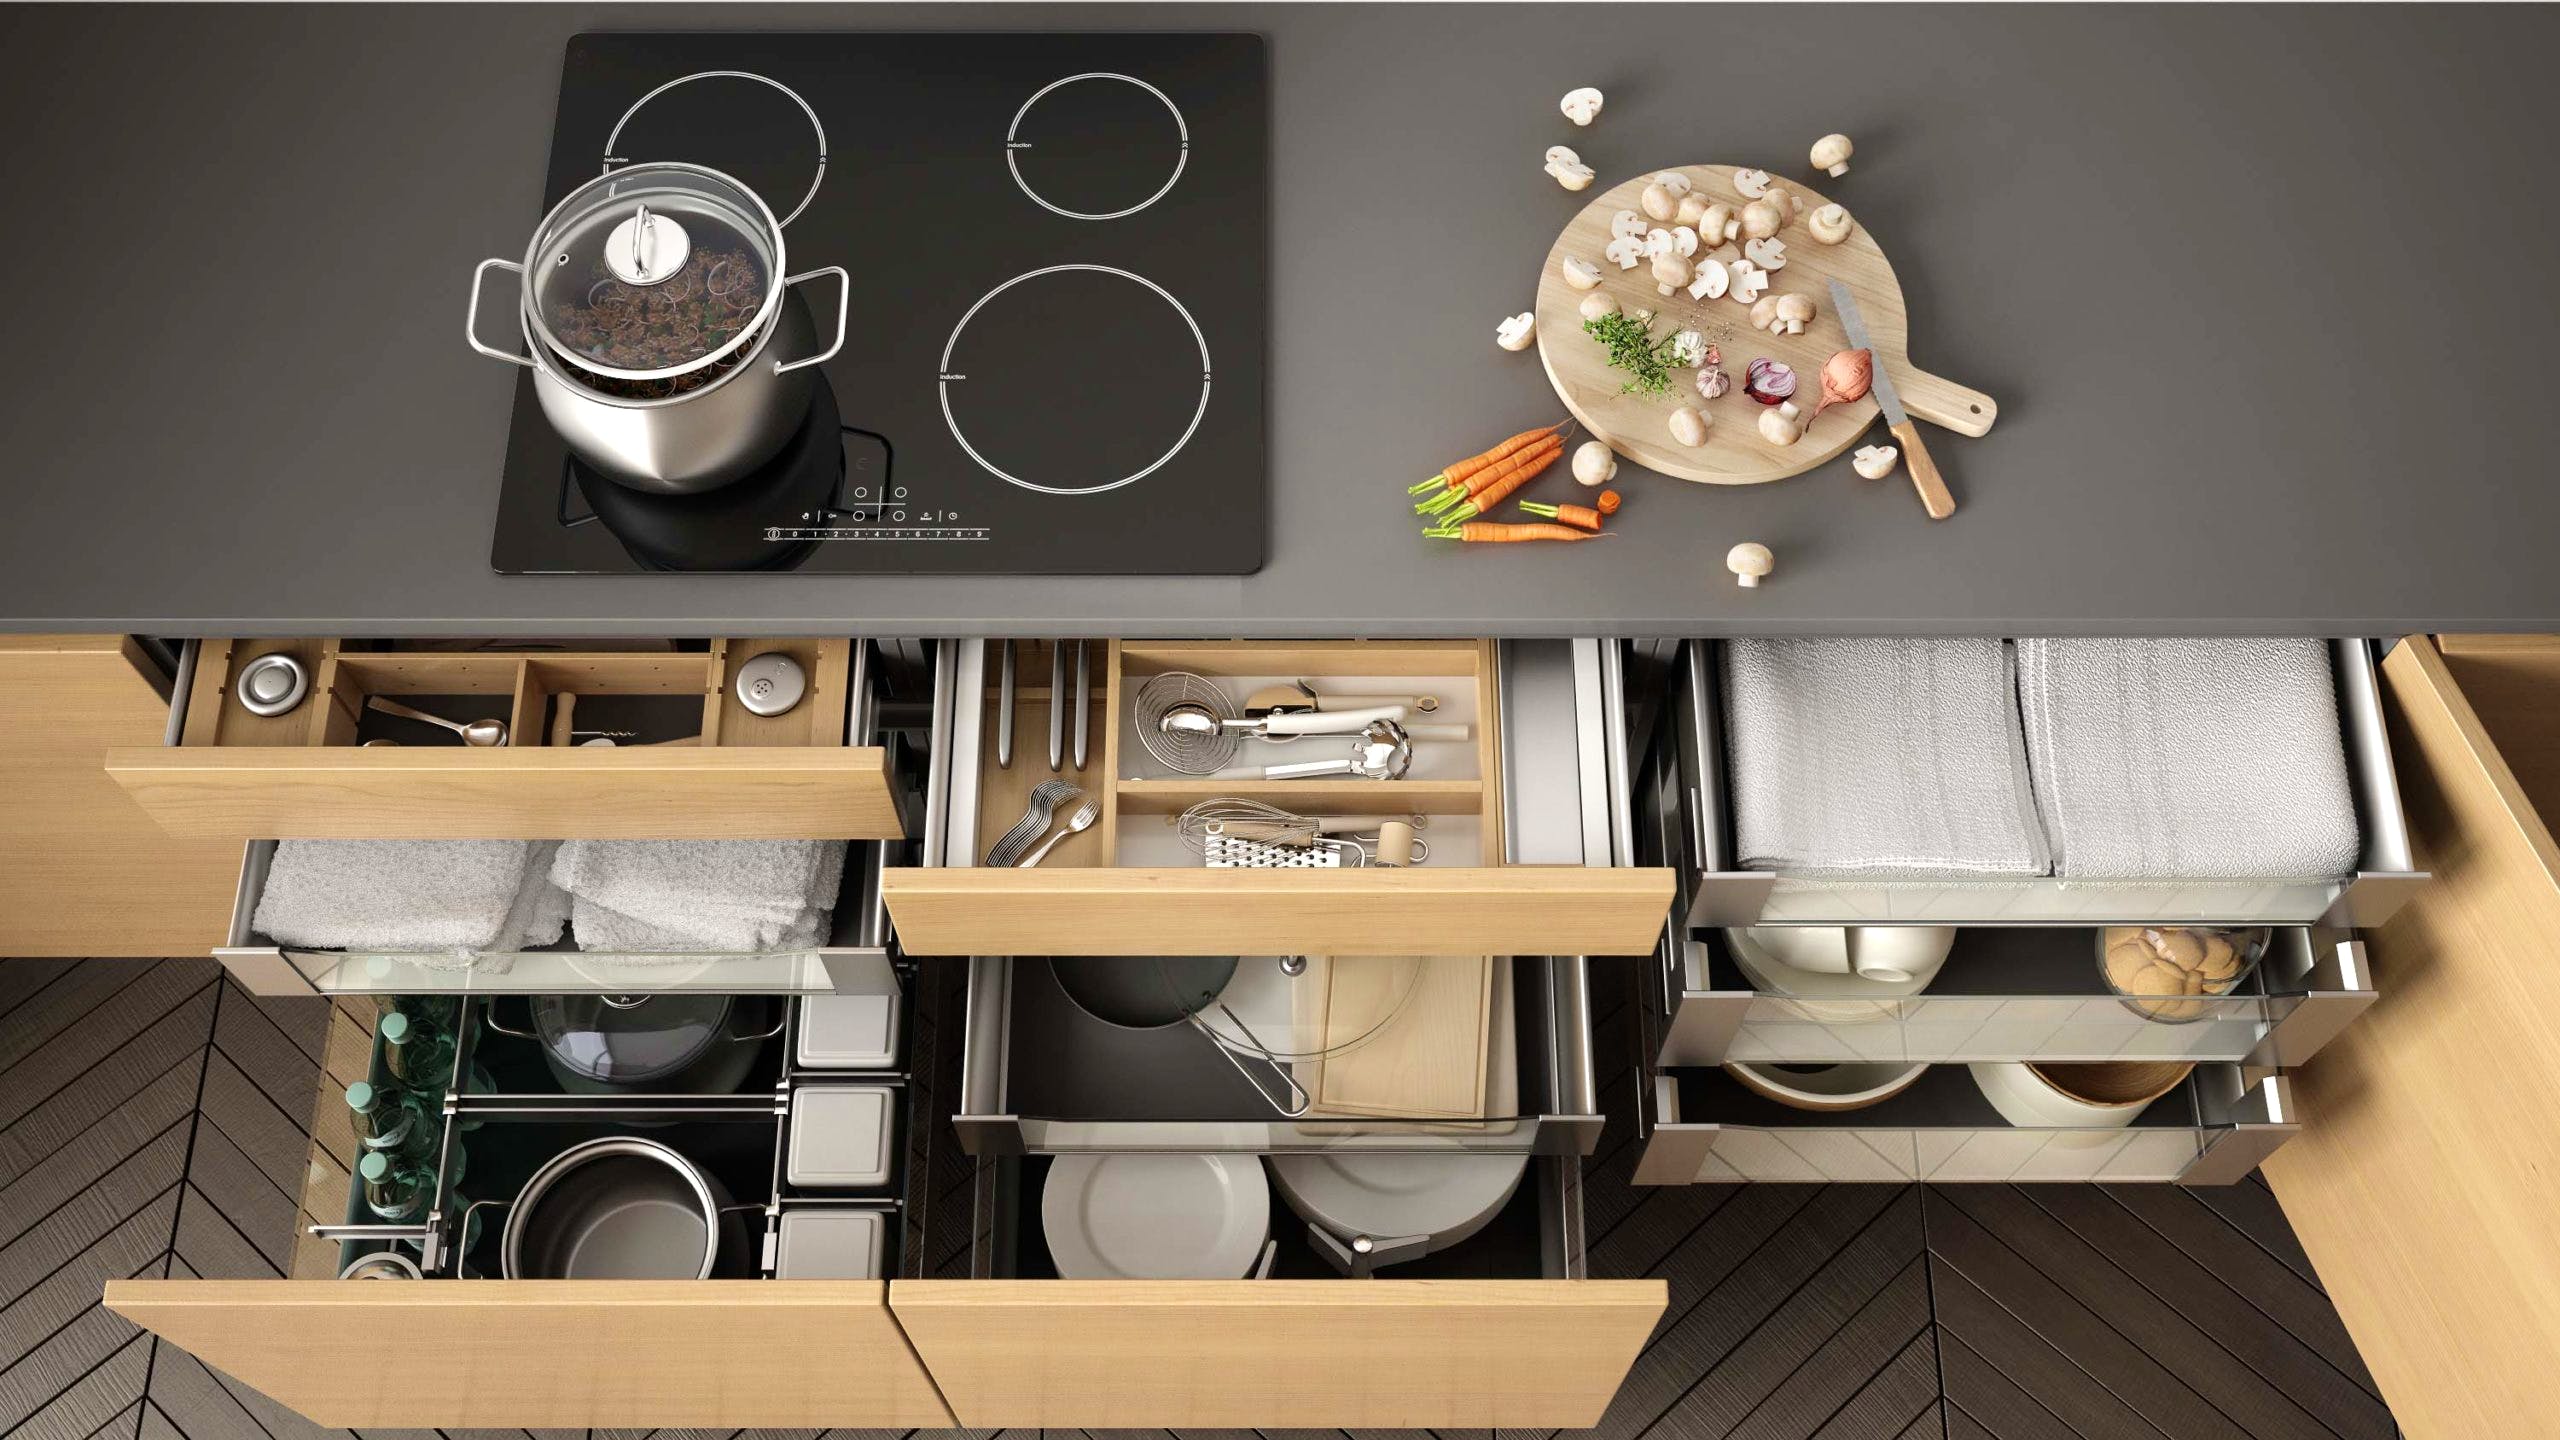 Image of Orden en la cocina scaled 2 in Steps to organize your kitchen and optimize your space - Cosentino